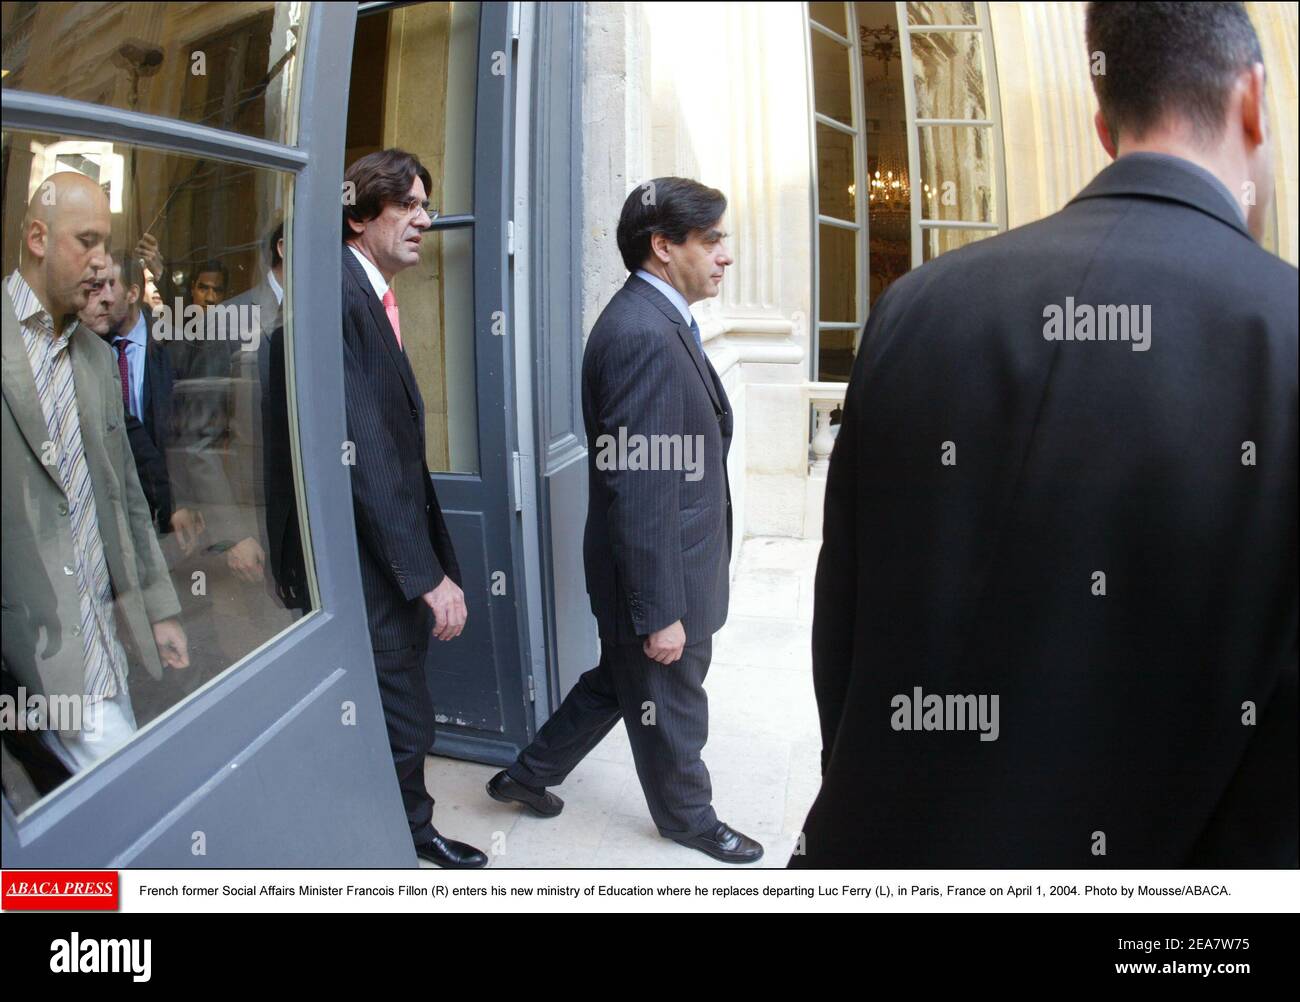 French former Social Affairs Minister Francois Fillon (R) enters his new ministry of Education where he replaces departing Luc Ferry (L), in Paris, France on April 1, 2004. Photo by Mousse/ABACA. Stock Photo